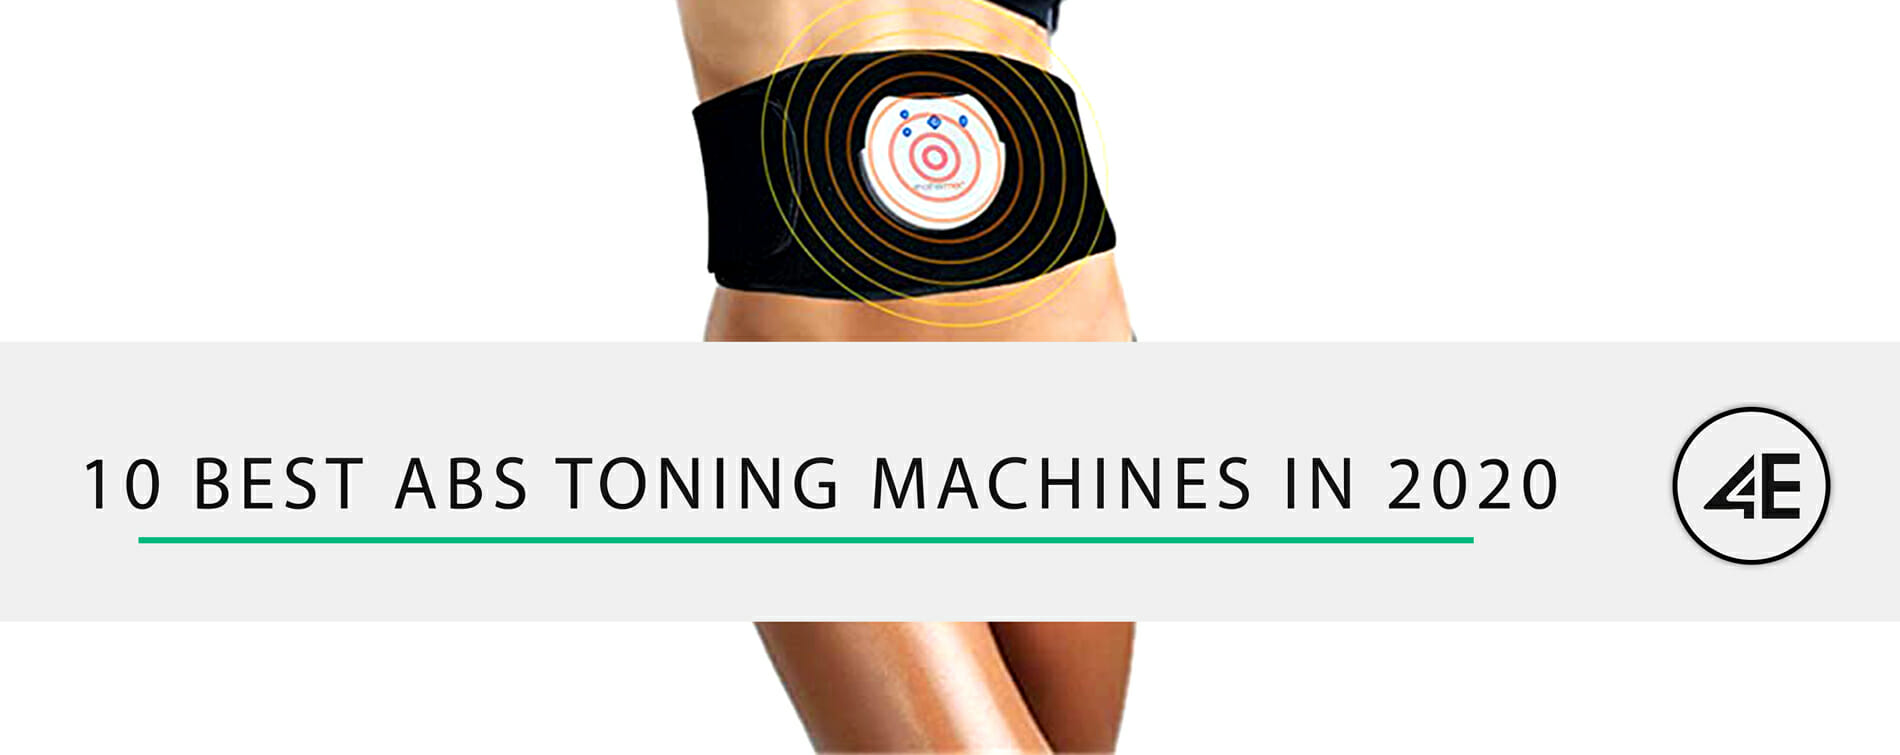 10 Best Abs Toning Machines